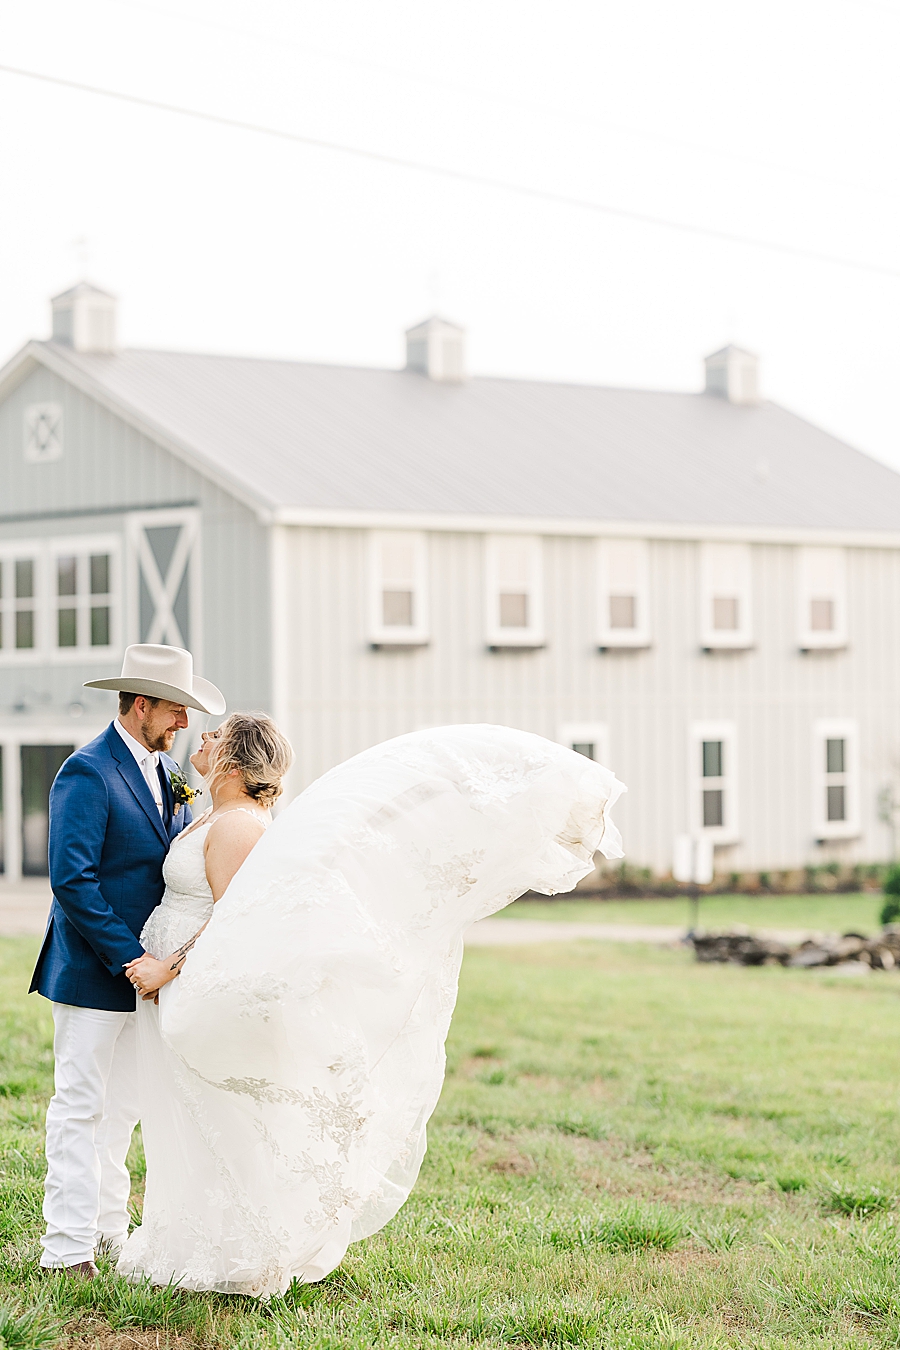 Standing in front of a barn at wedding by Amanda May Photos